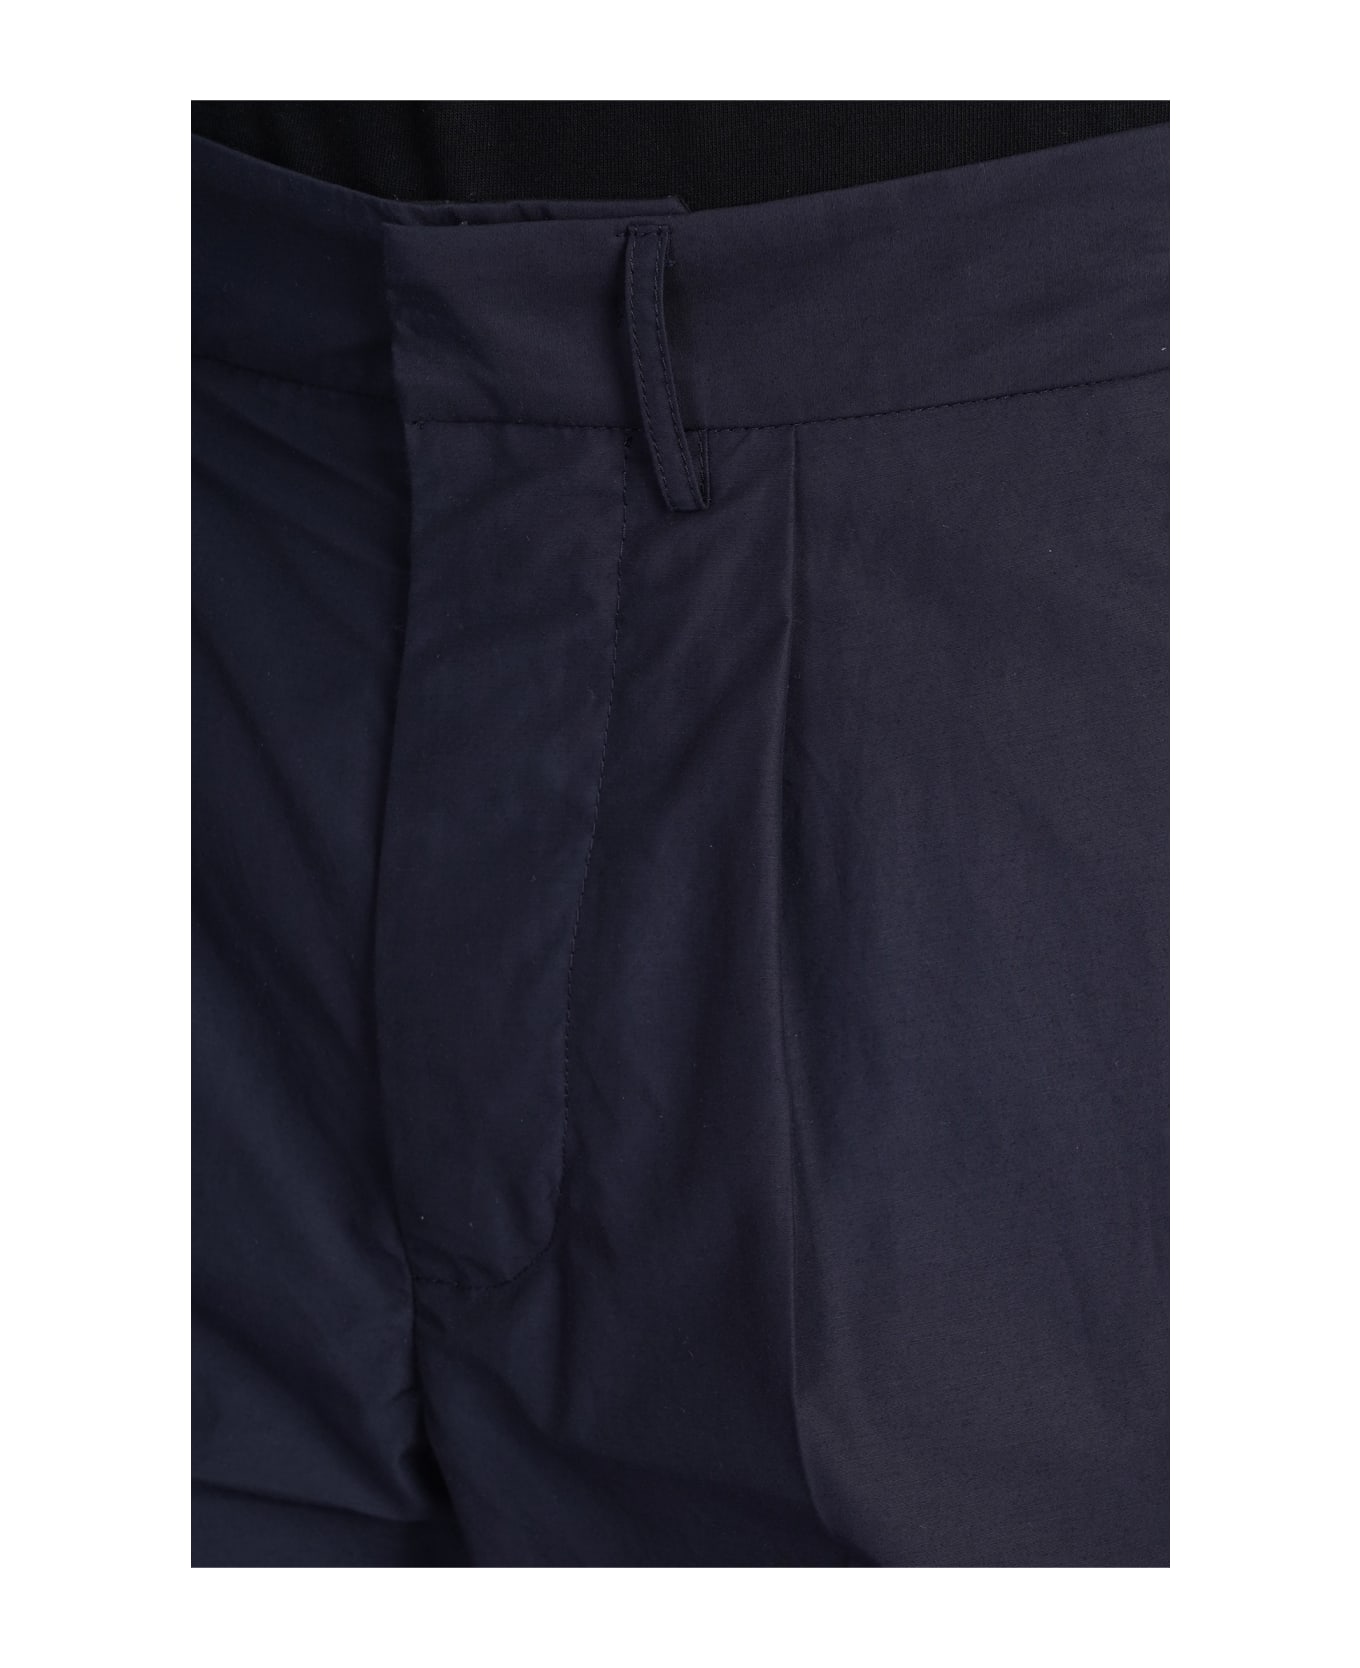 Mauro Grifoni Pants In Blue Cotton - blue ボトムス